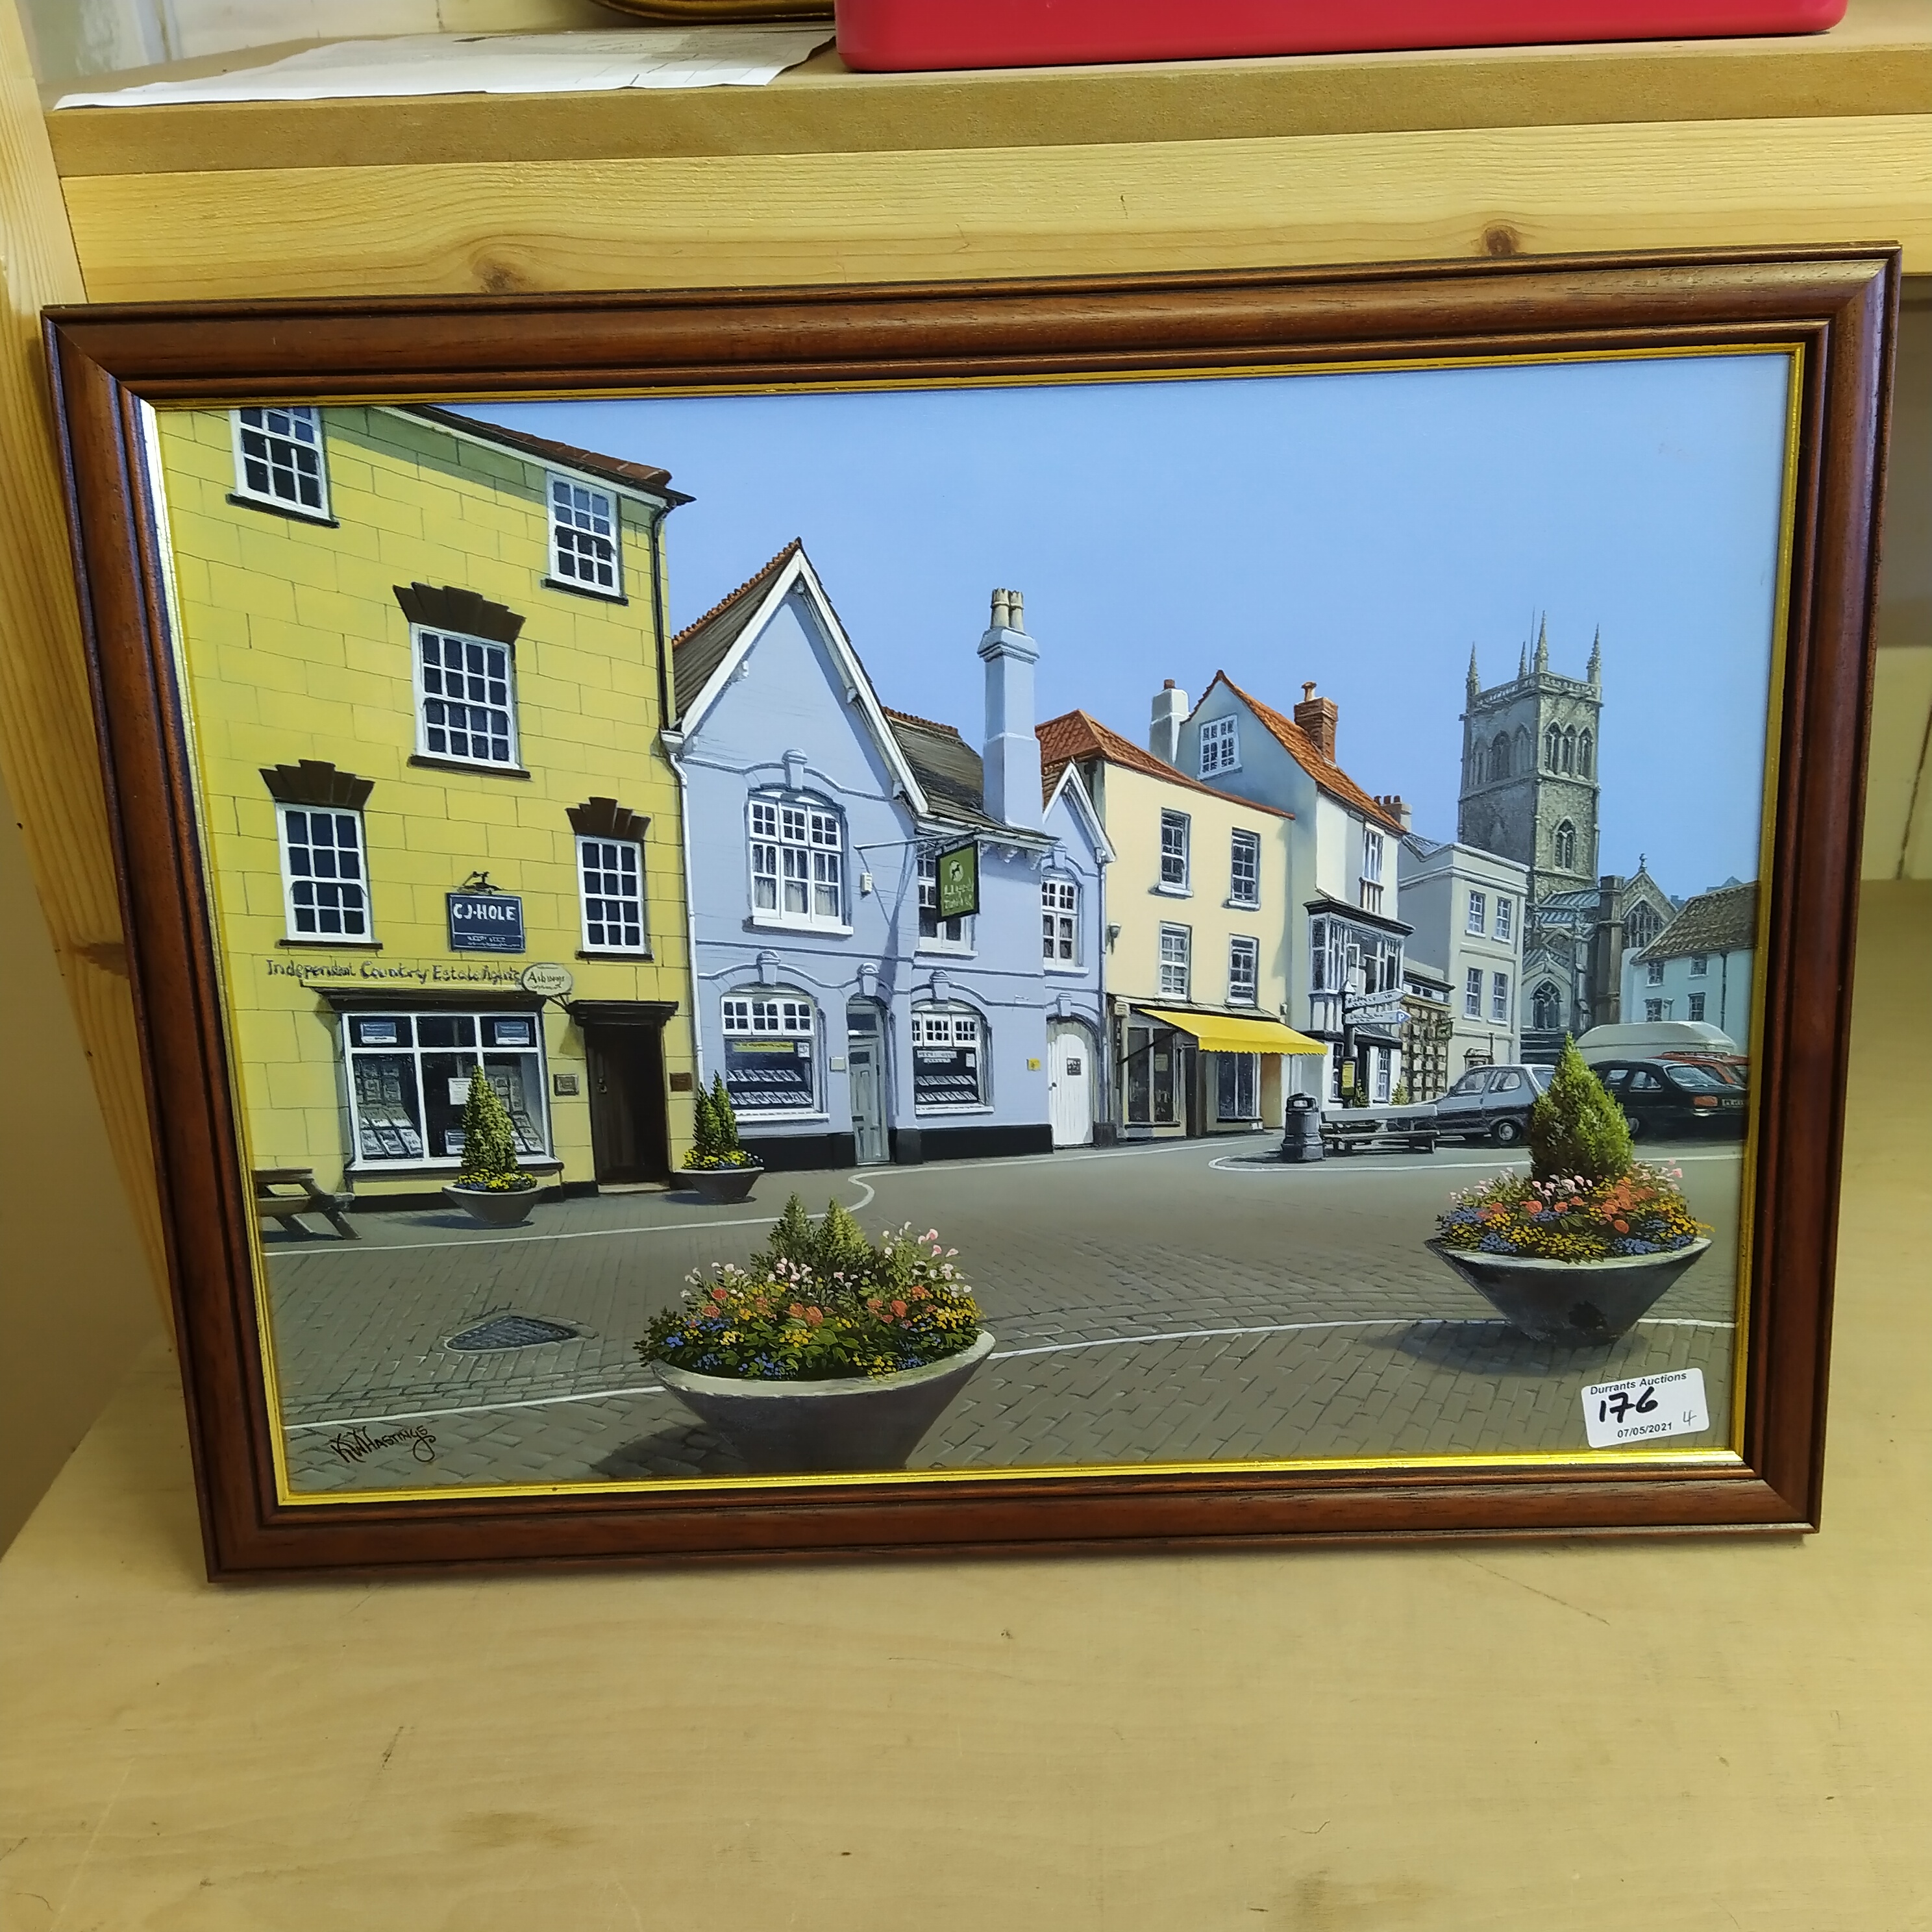 Four oil paintings on board signed Keith Hastings of 'The First Inn in England', country church, - Image 3 of 3